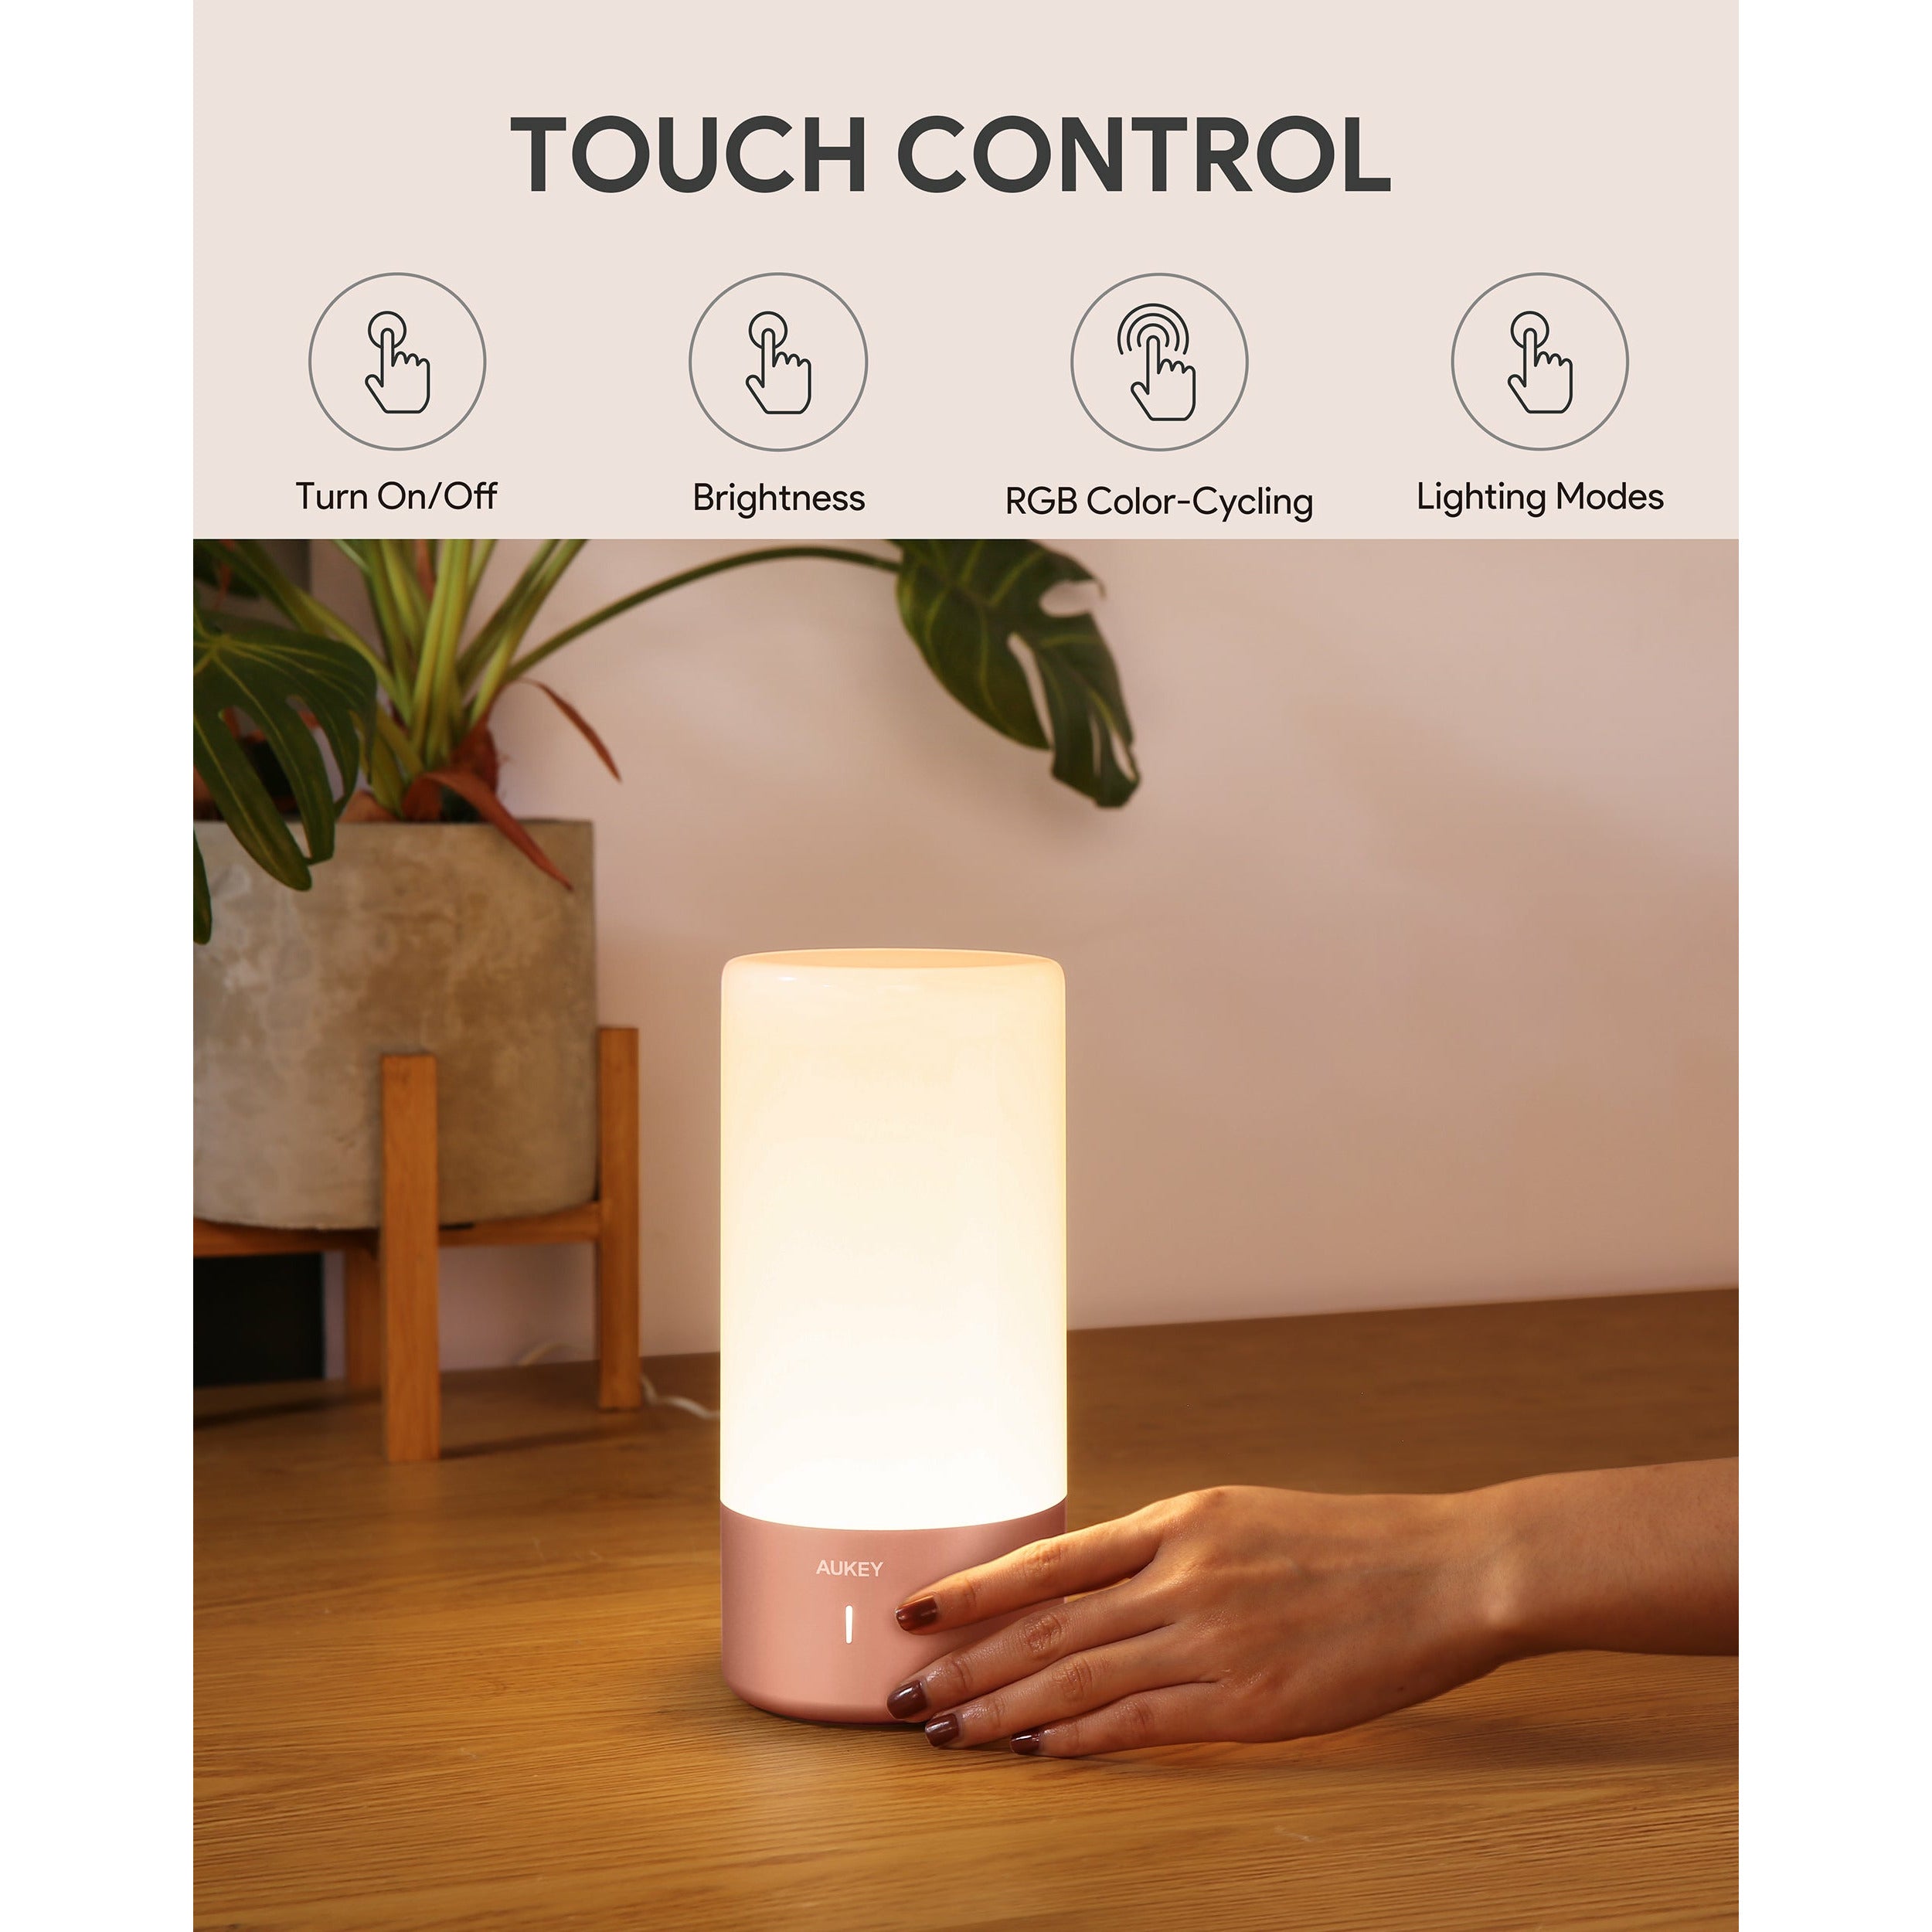 AUKEY Table Lamp 360° Touch Control LT-T6